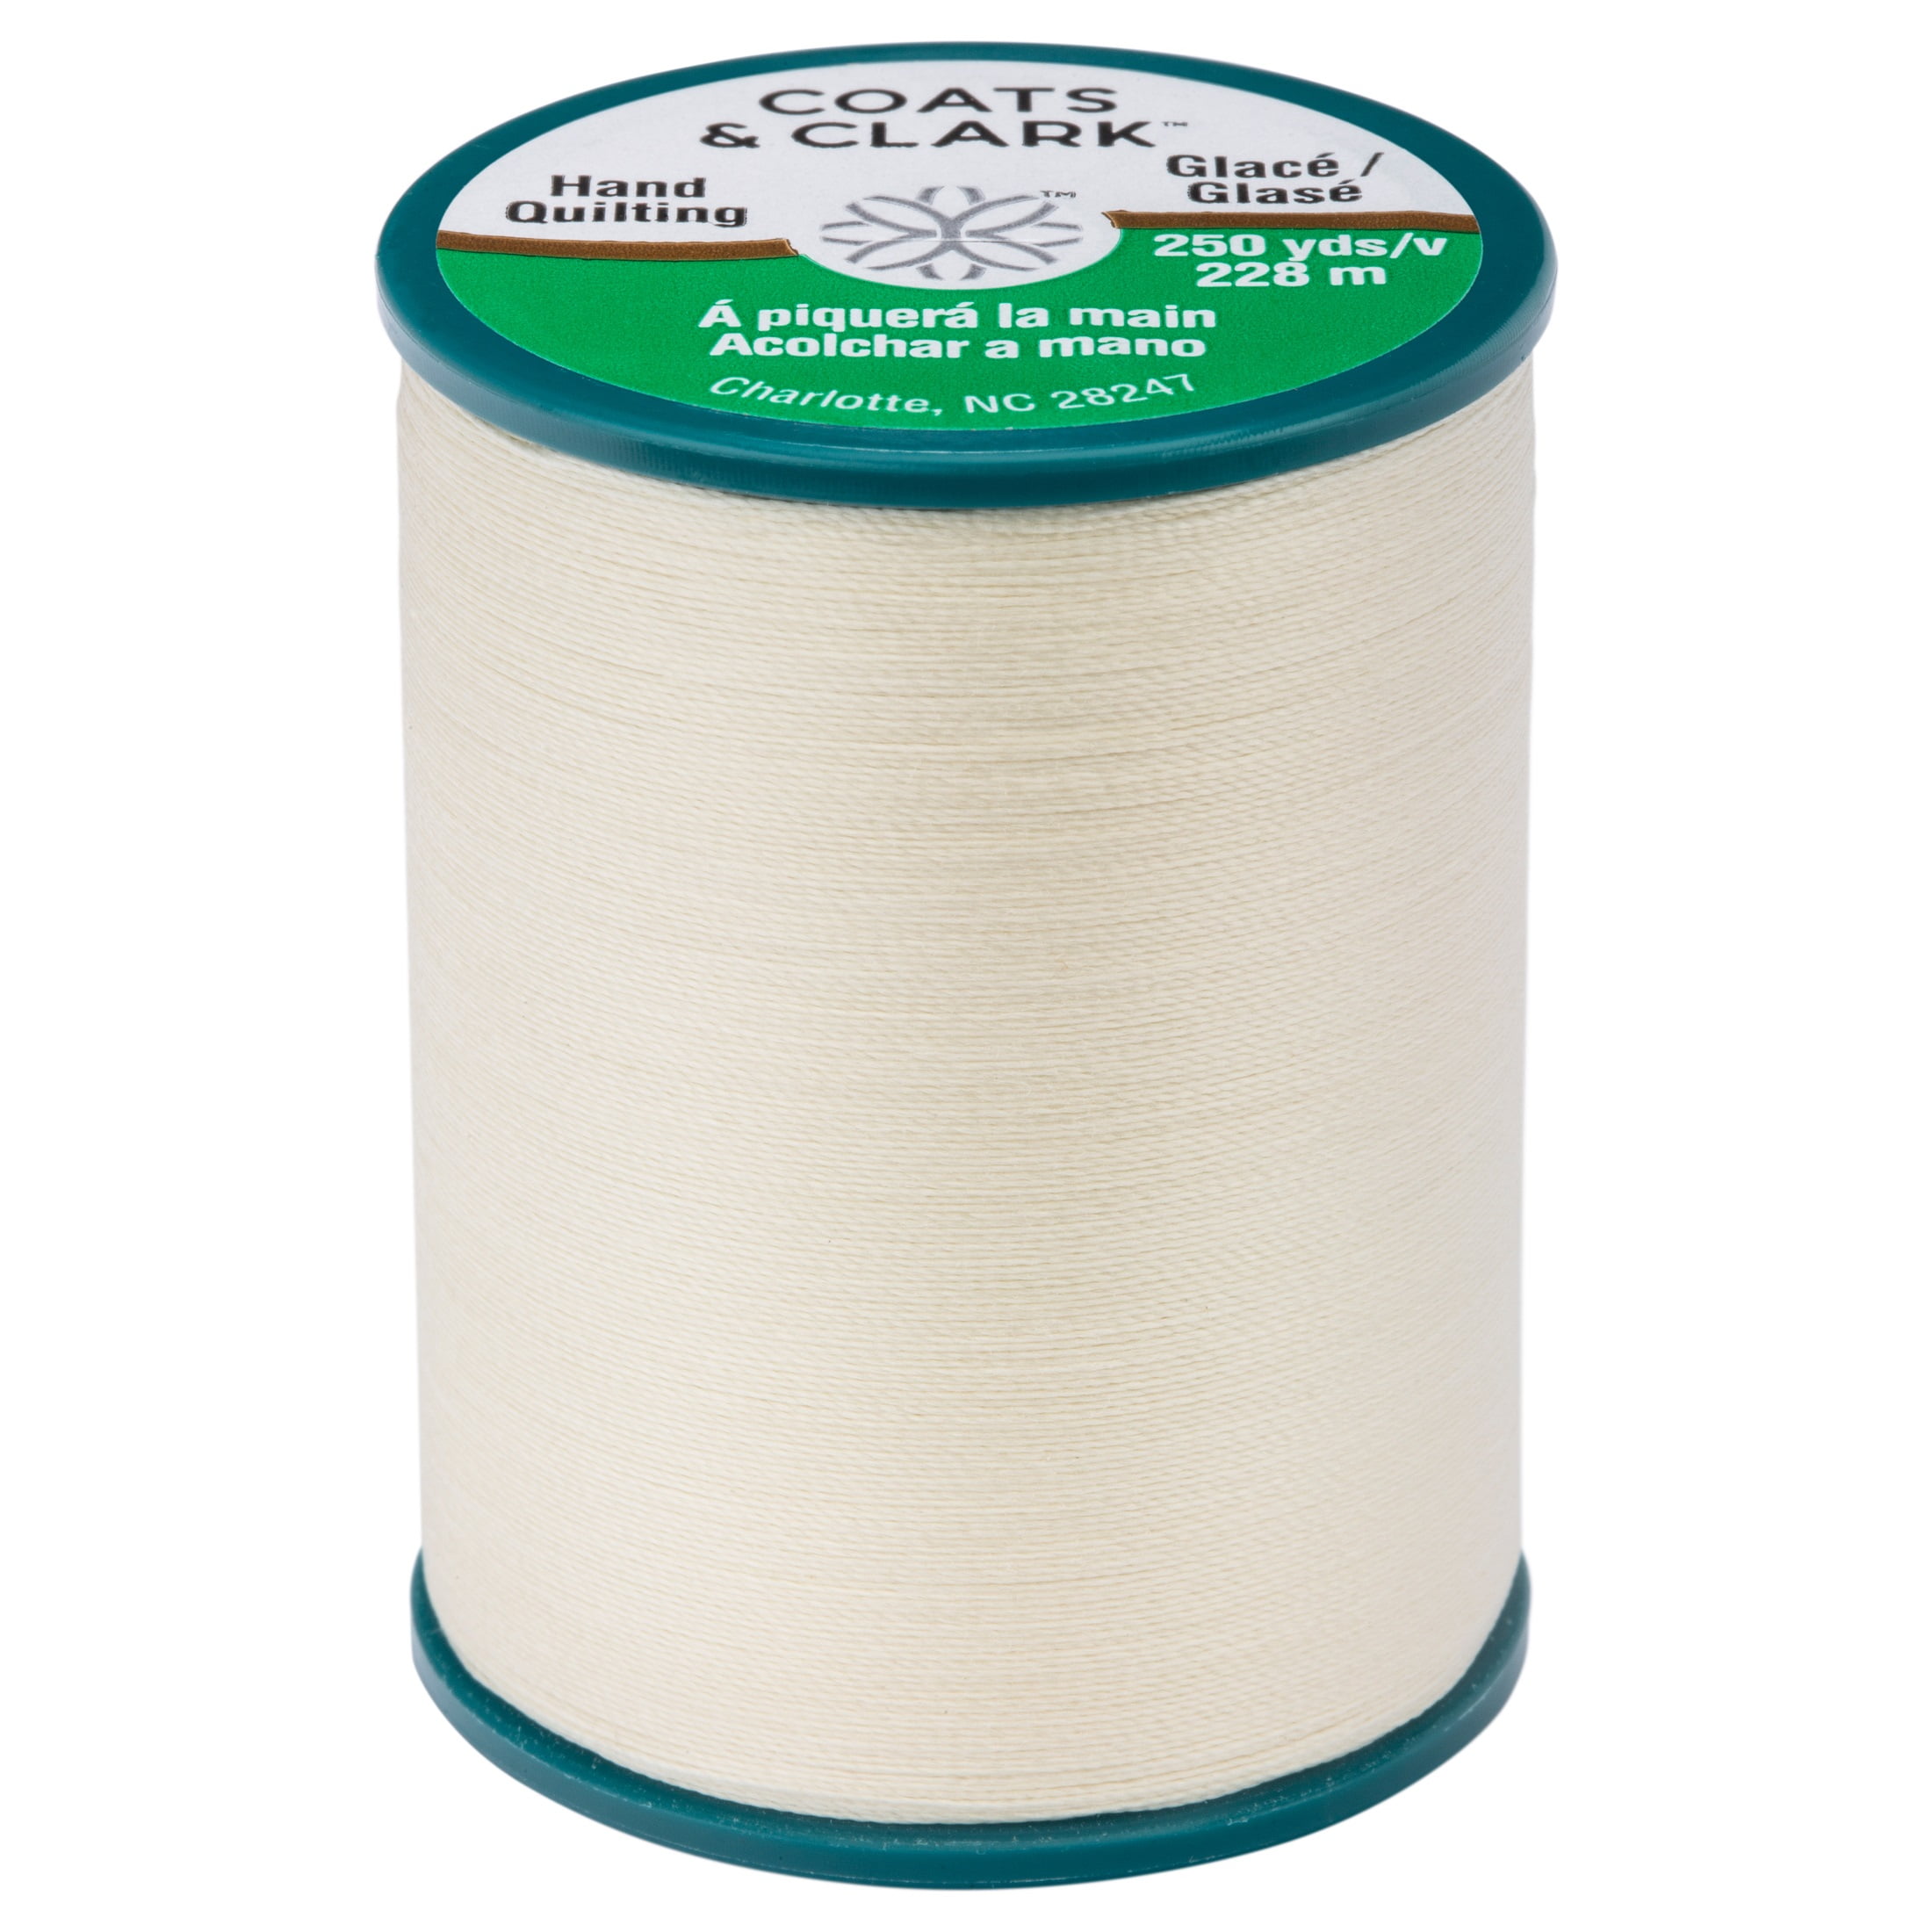 Coats & Clark Dual Duty Hand Quilting Cream Polyester/Cotton Thread, 250 Yards